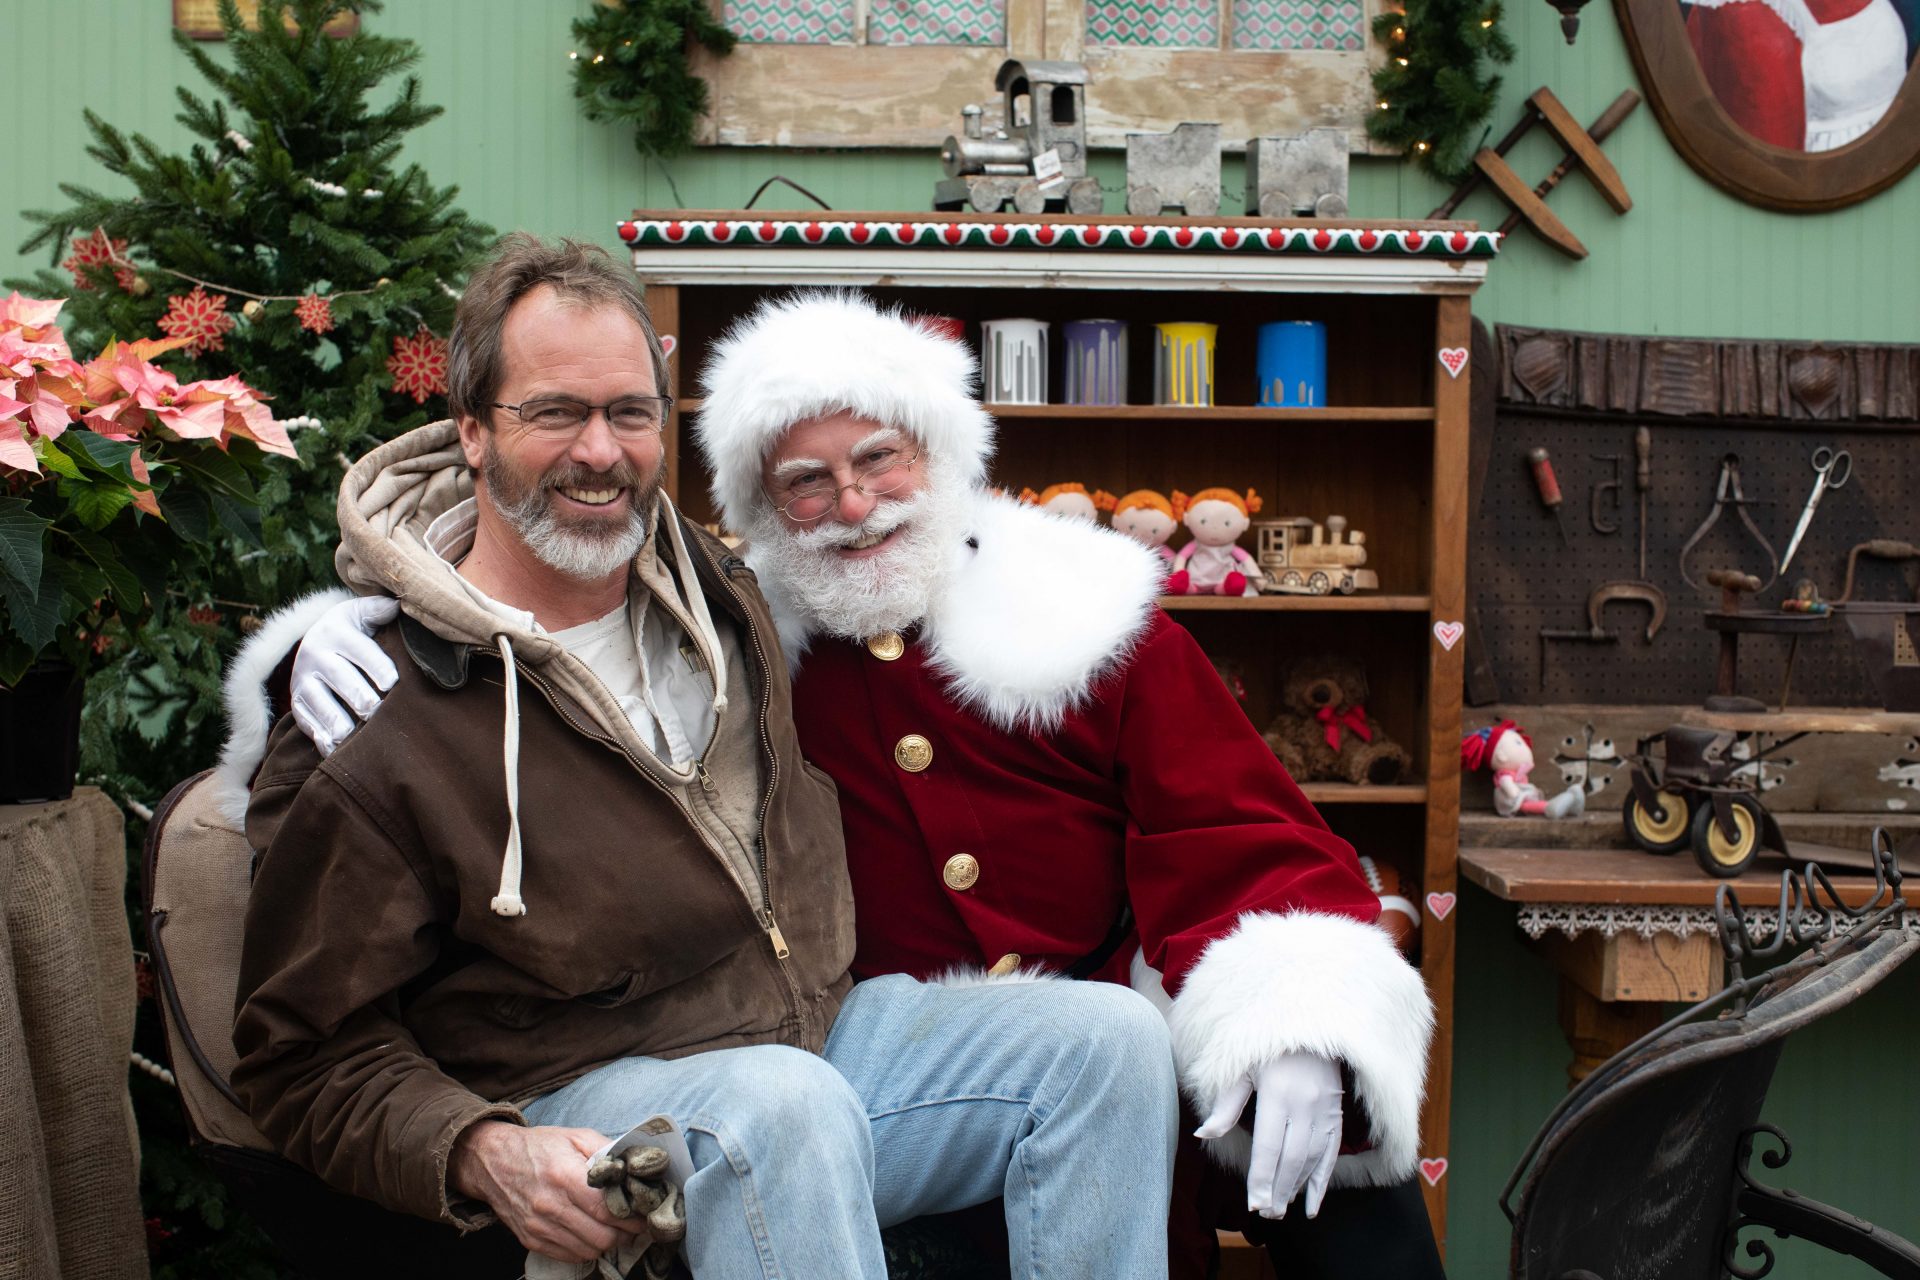 Norm Schultz, Farm Manager of Linvilla Orchards in Media, Pennsylvania poses with Santa Claus, played by Steve Nieman of Springfield, PA. Linvilla Orchards has thrived by diversifying their operations and offering a complete Christmas experience to visitors.